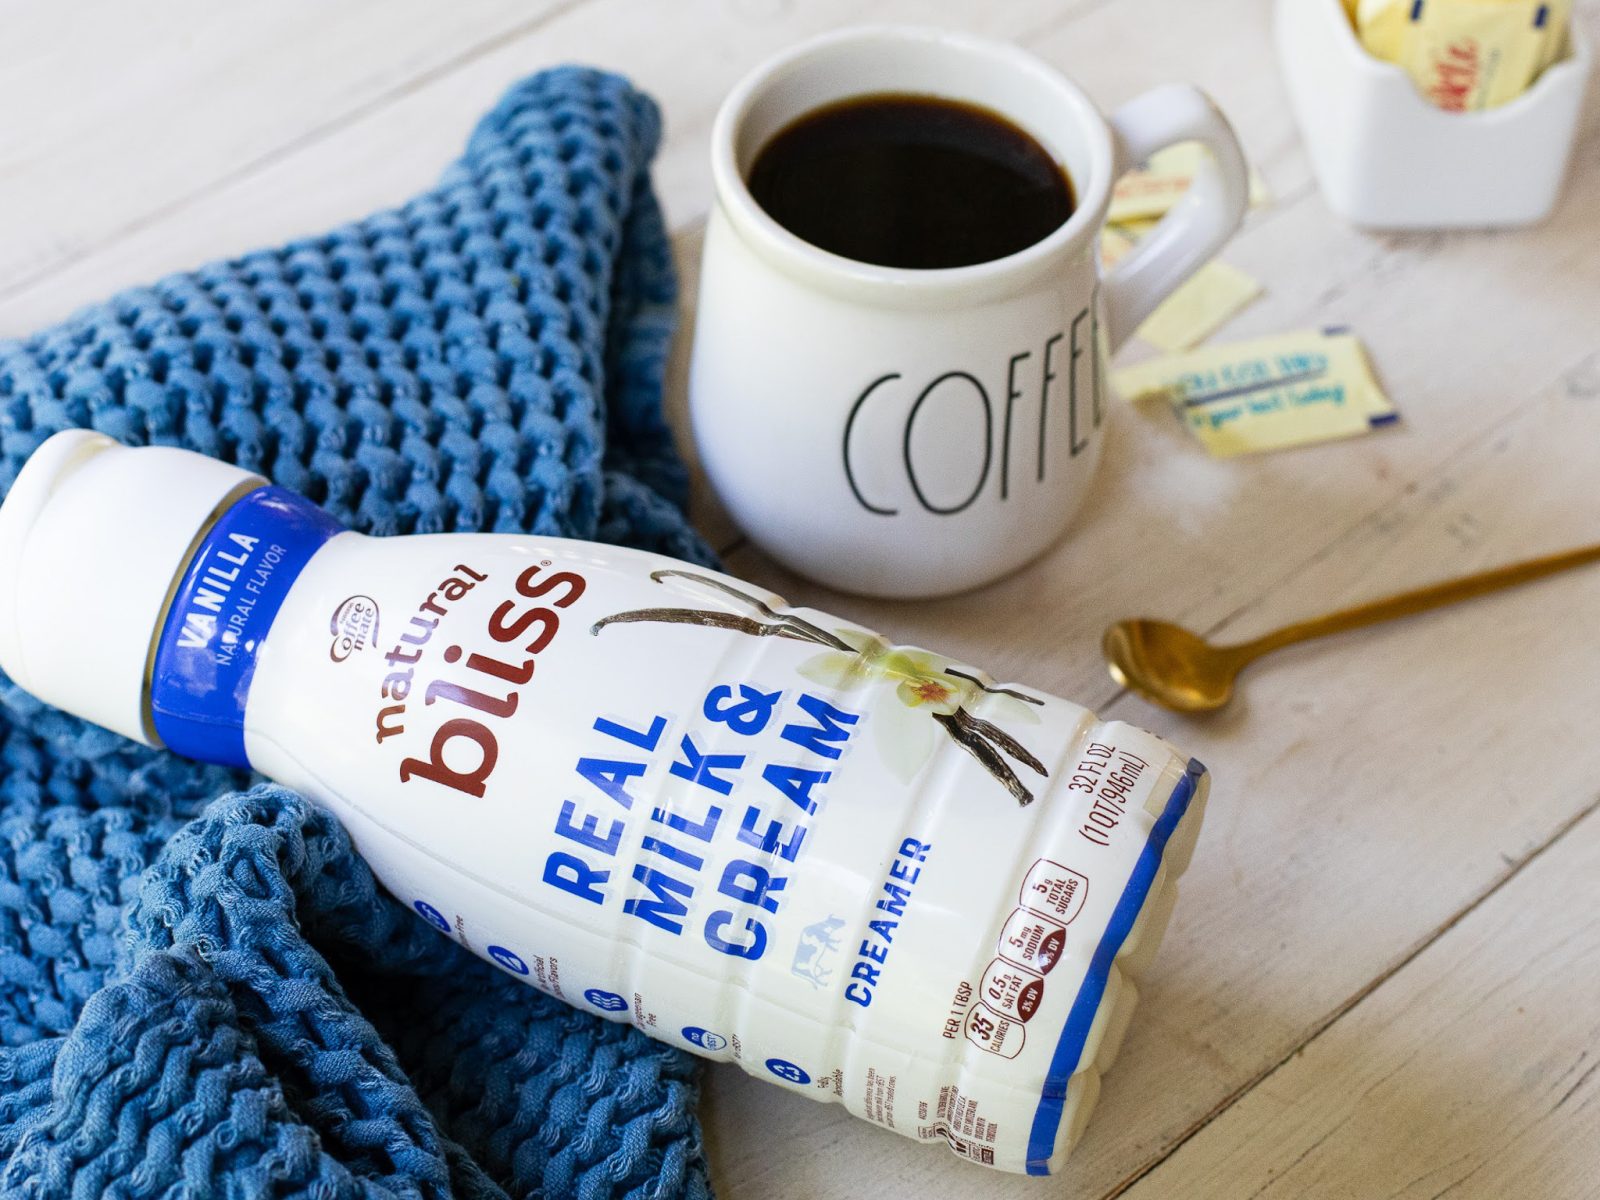 Get Natural Bliss Creamer For As Low As $3.24 At Kroger